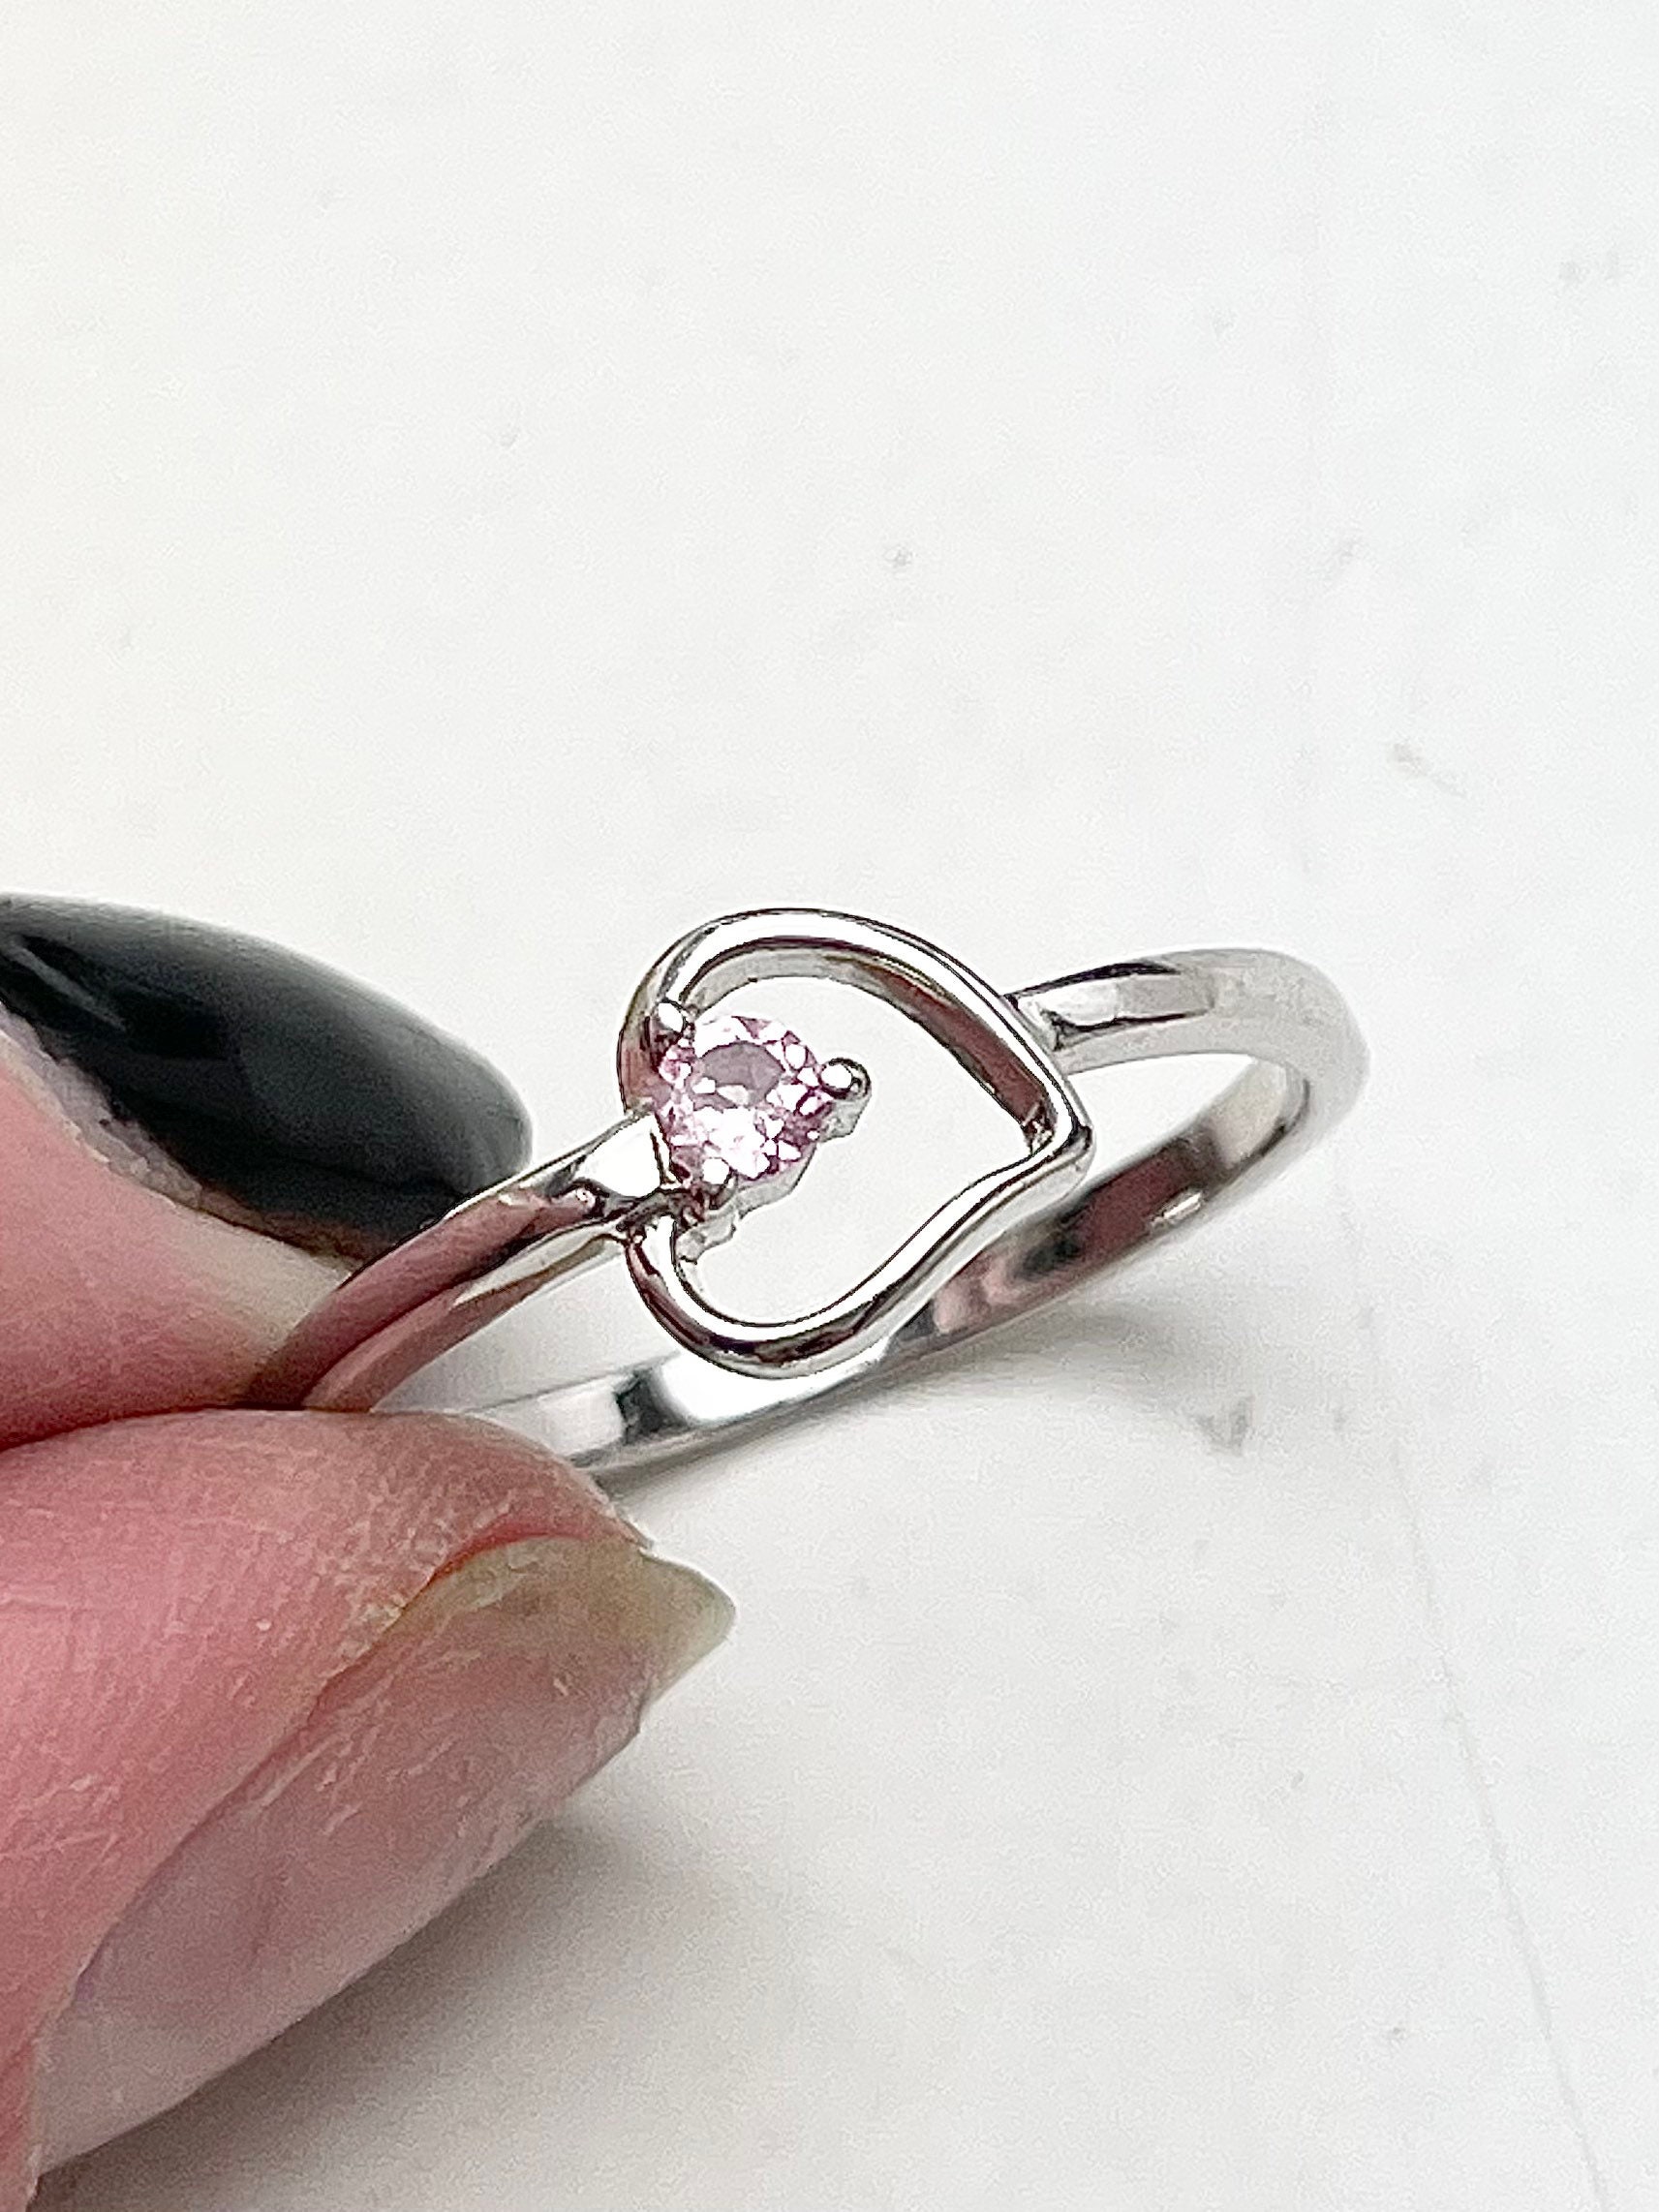 Amazon.com: Open Heart Shaped Midi Knuckle Ring, Sterling Silver 925 Smooth  Polished Finish, Handmade by Claudia Lira. Perfect Gift Set : Handmade  Products